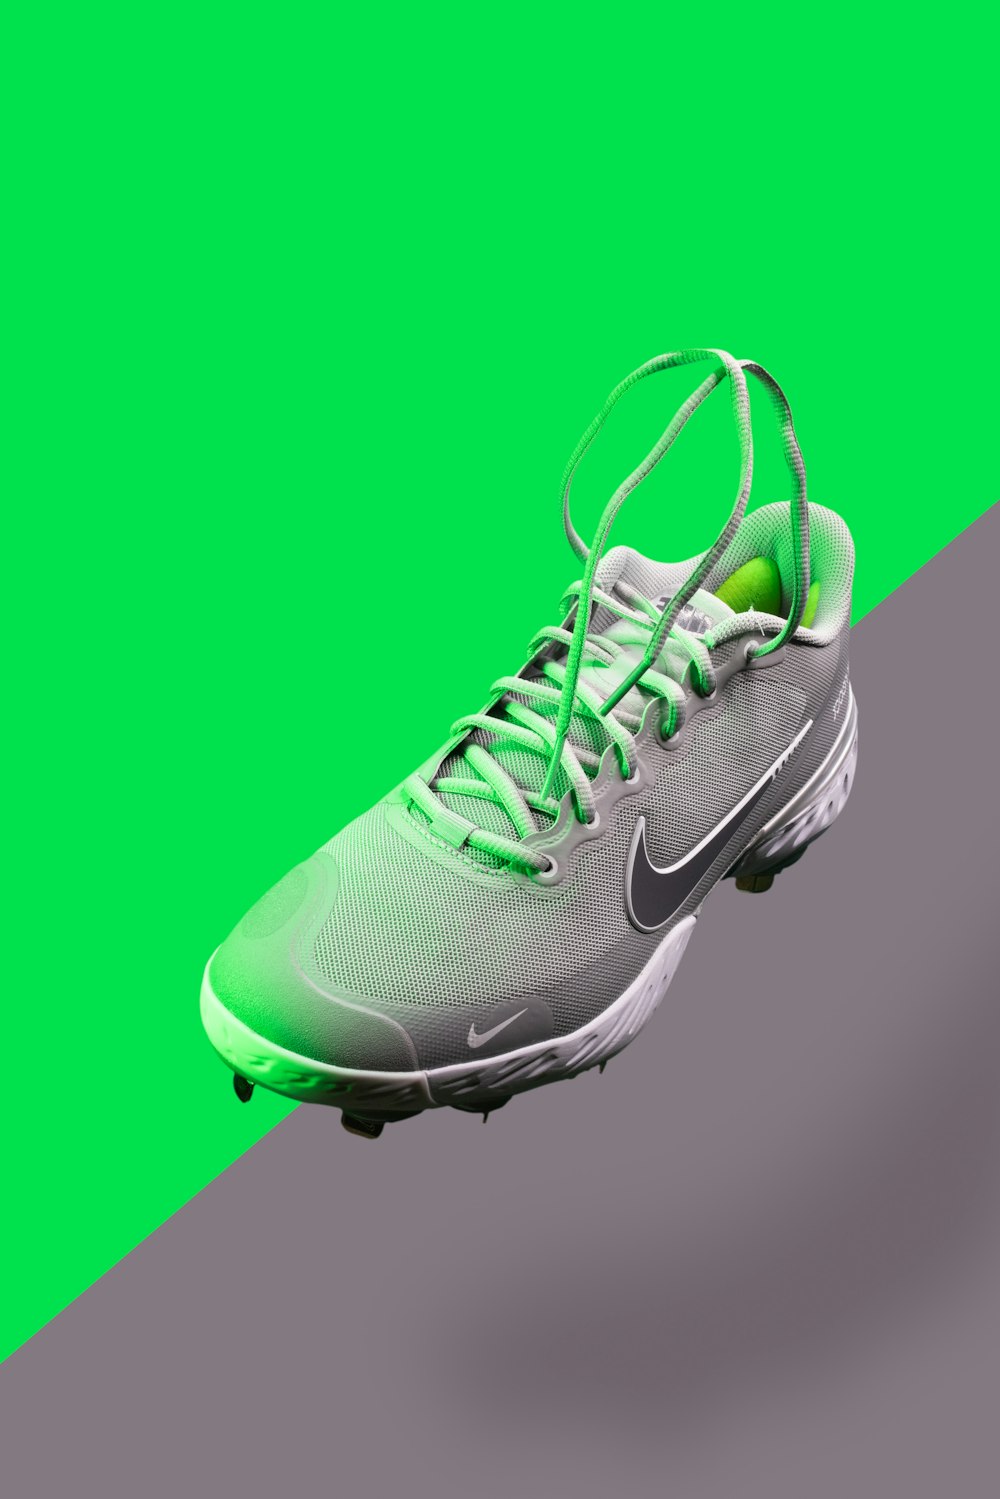 green and white nike athletic shoe